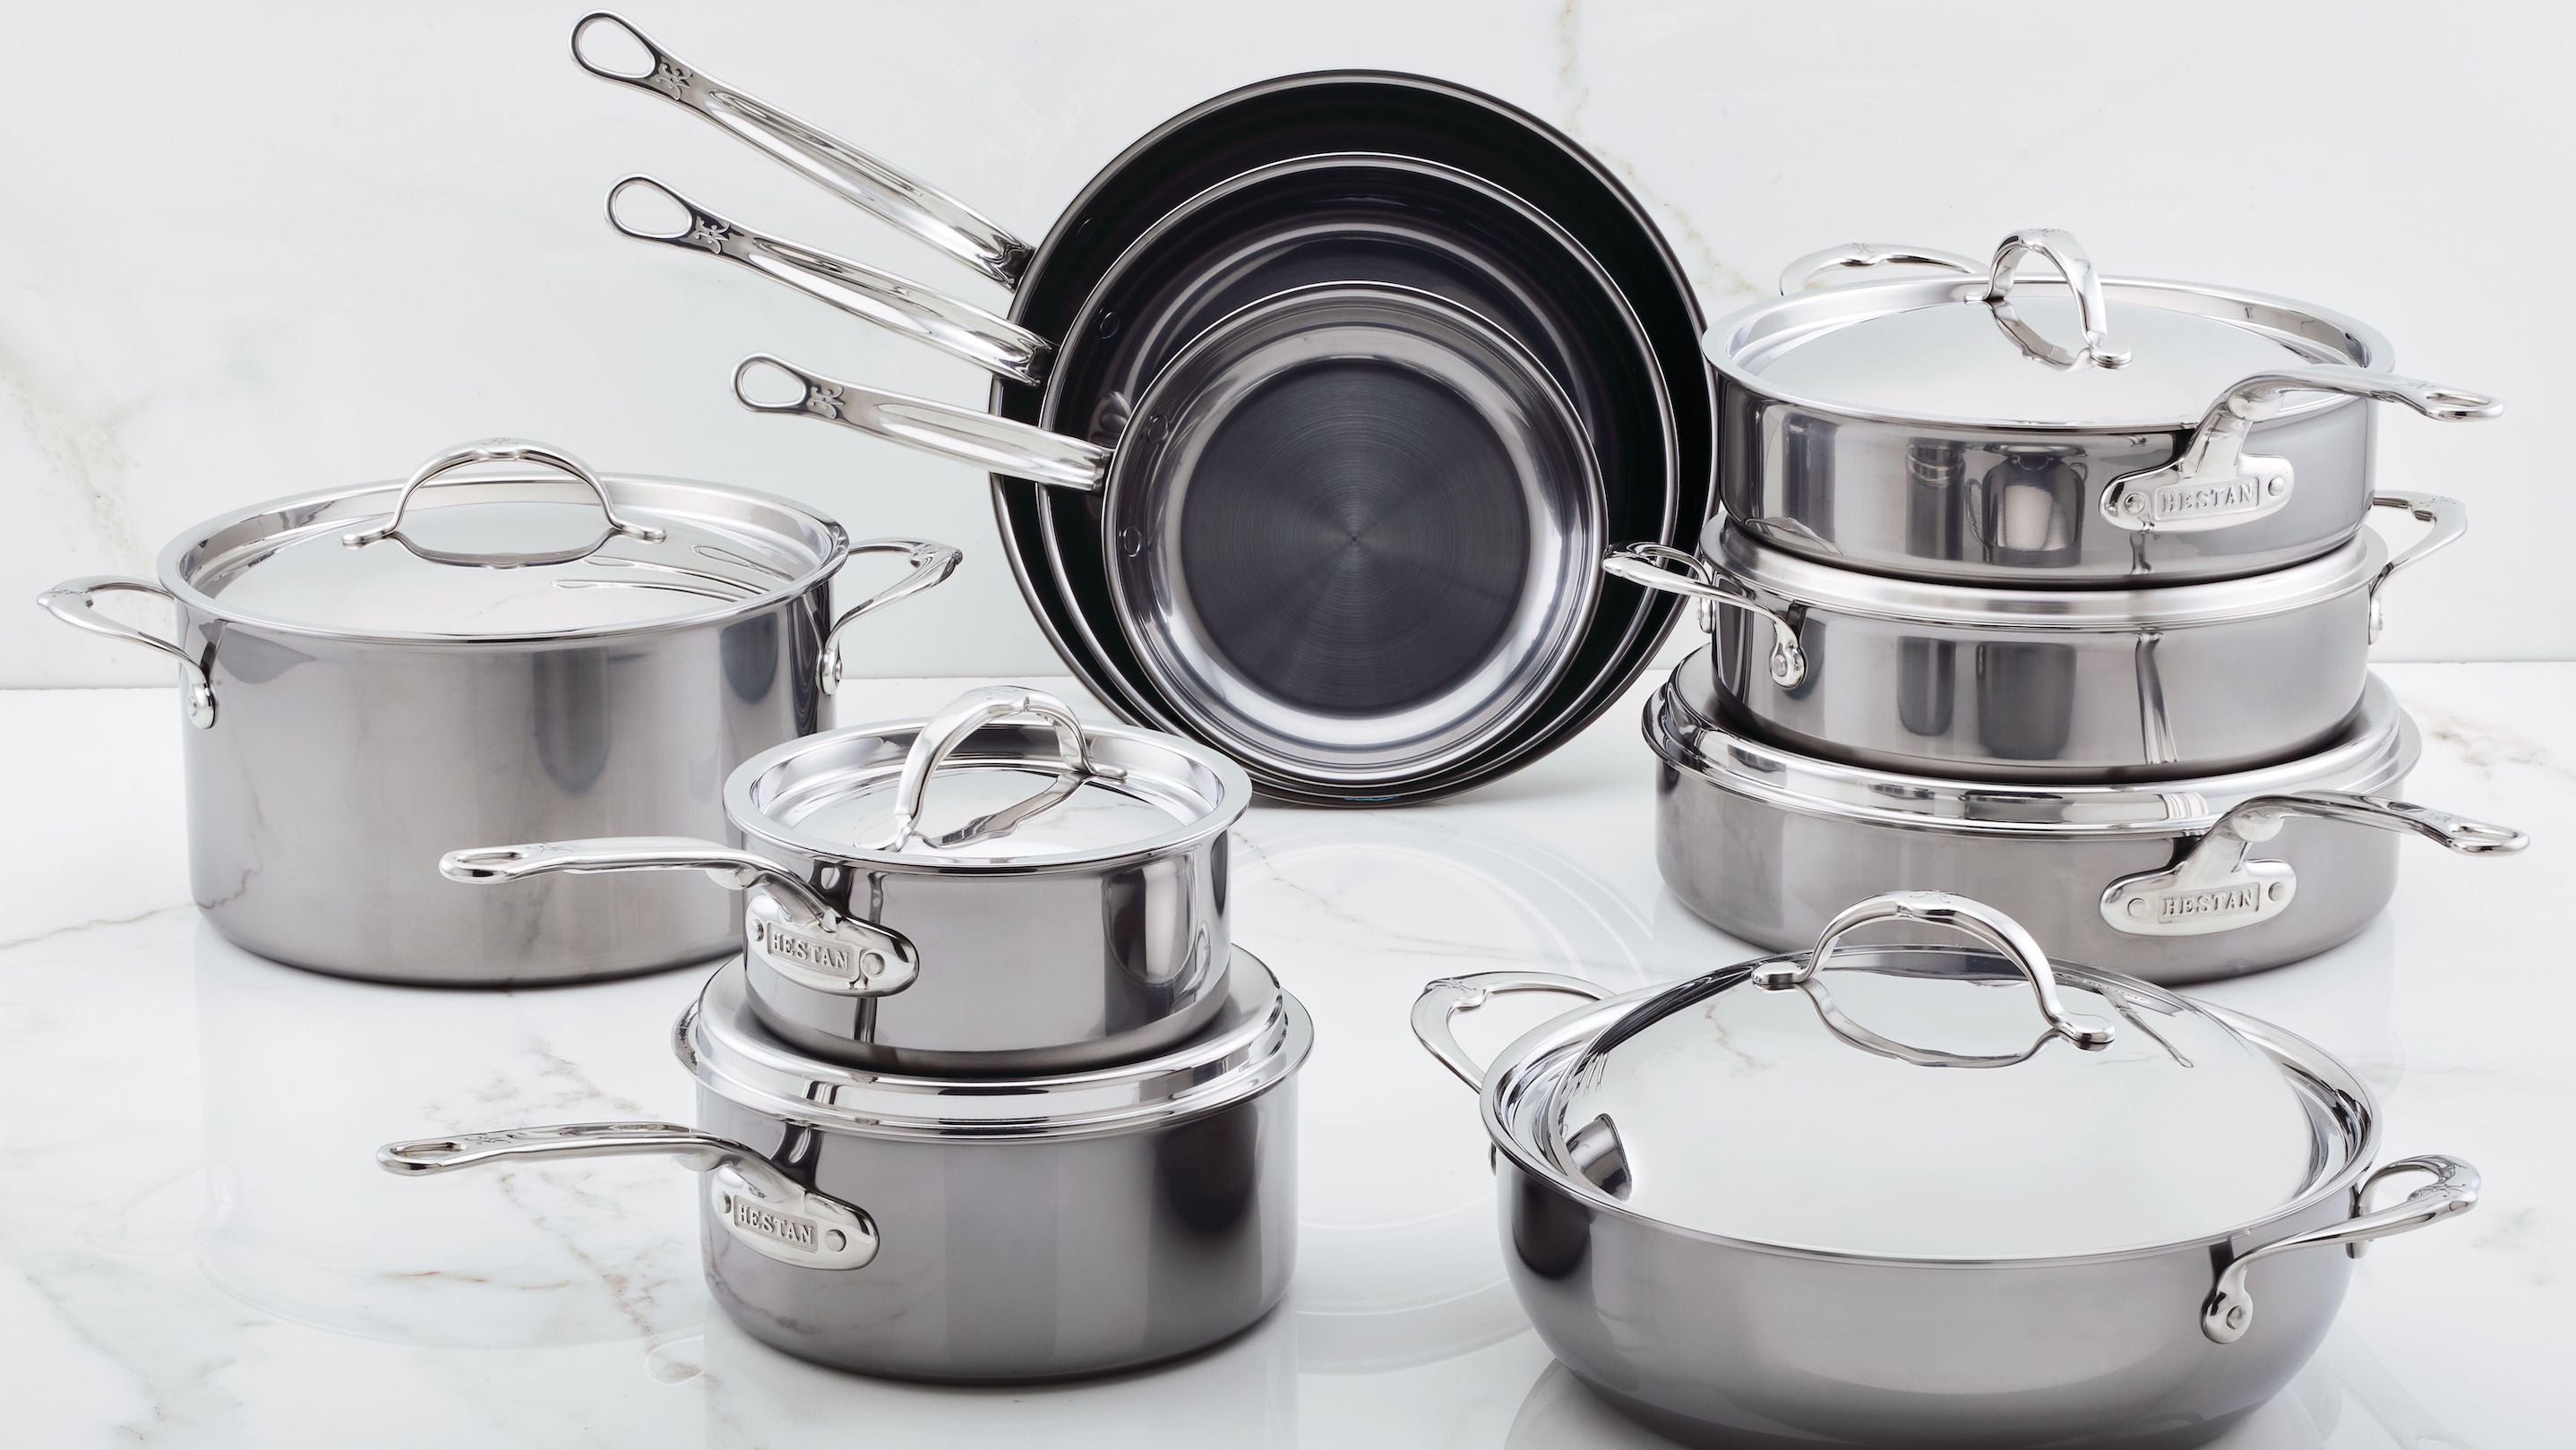 The 10 Best Stainless Steel Cookware Sets of 2022